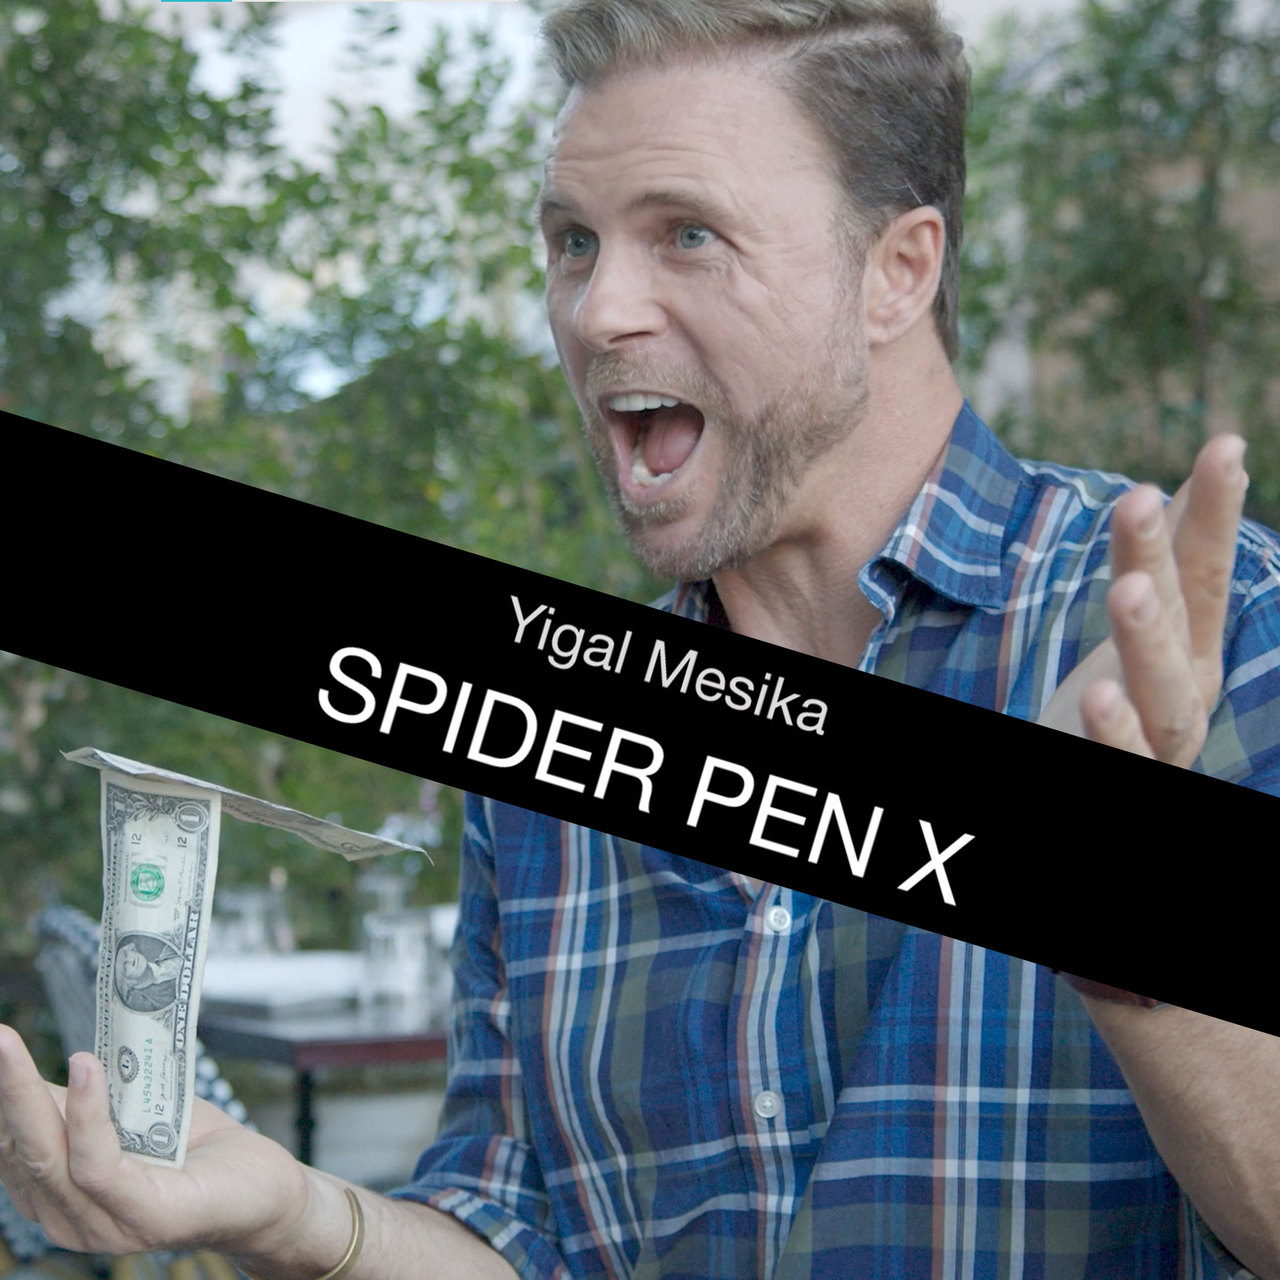 Spider Pen X by Yigal Mesika (MP4 Video Download 720p High Quality)